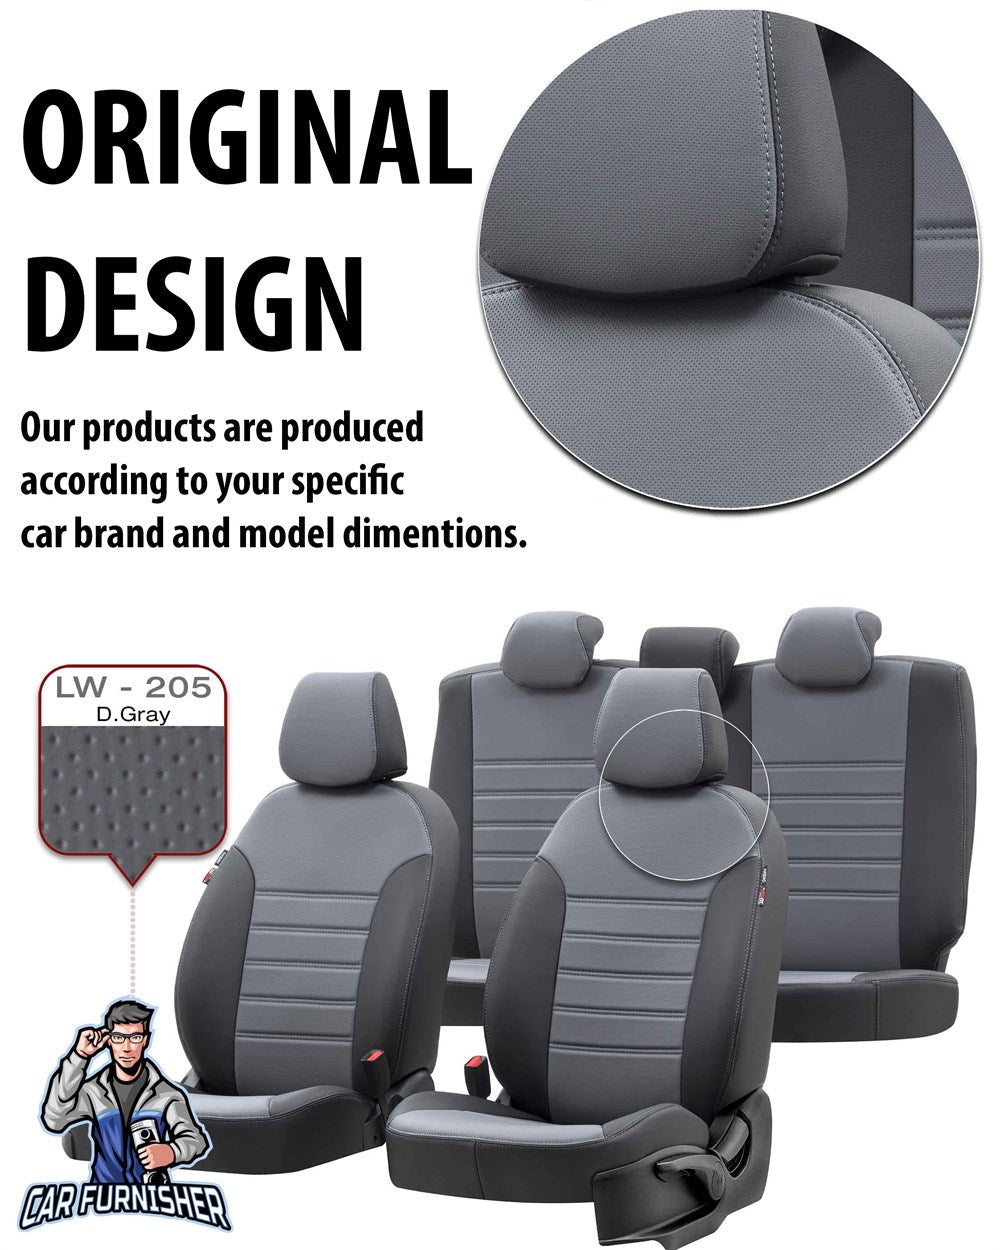 Volkswagen Amarok Seat Cover Istanbul Leather Design Black Leather